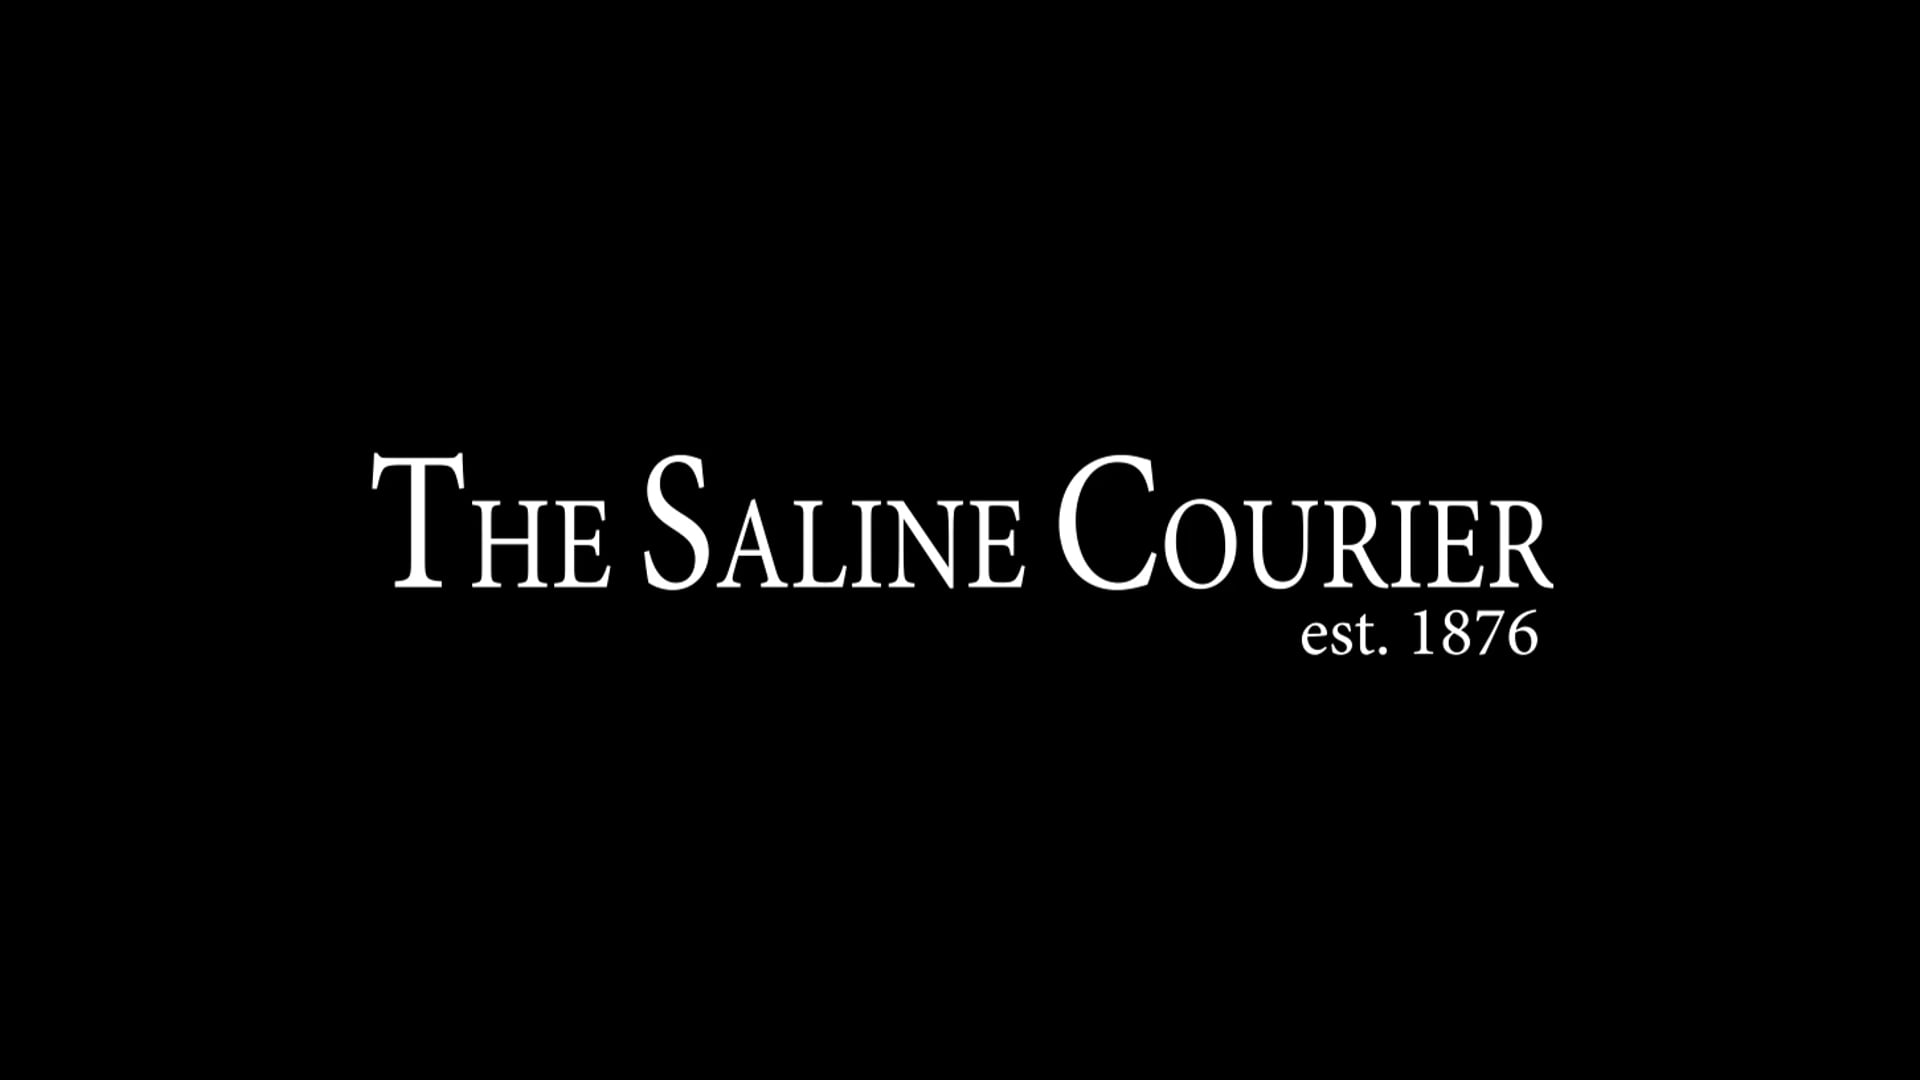 The Saline Courier